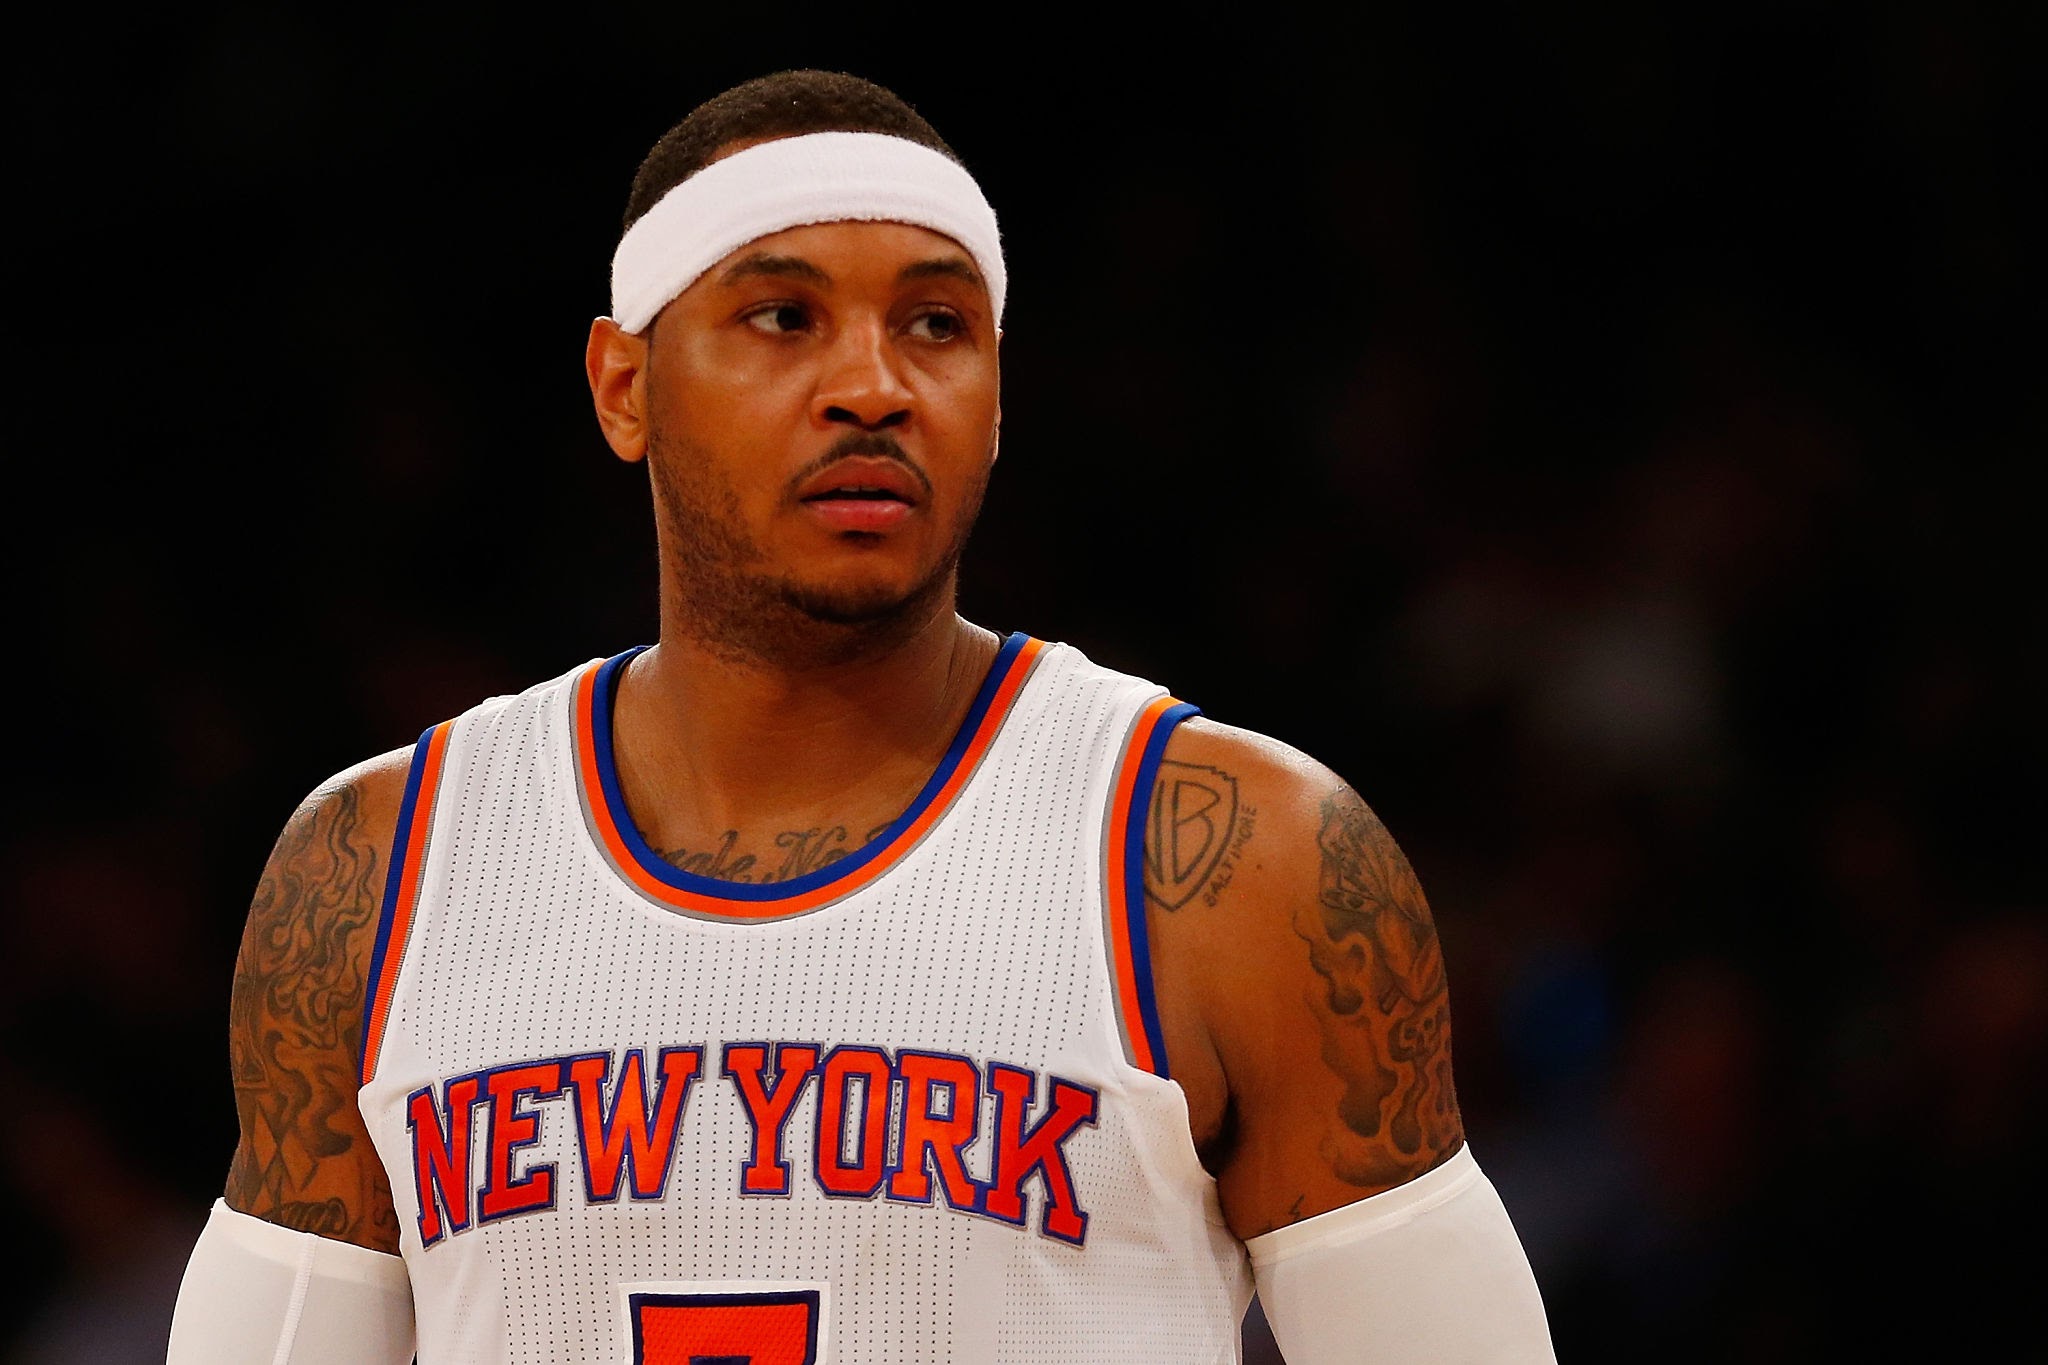 Nba Legend Carmelo Anthony Retires From Basketball Daily Trust